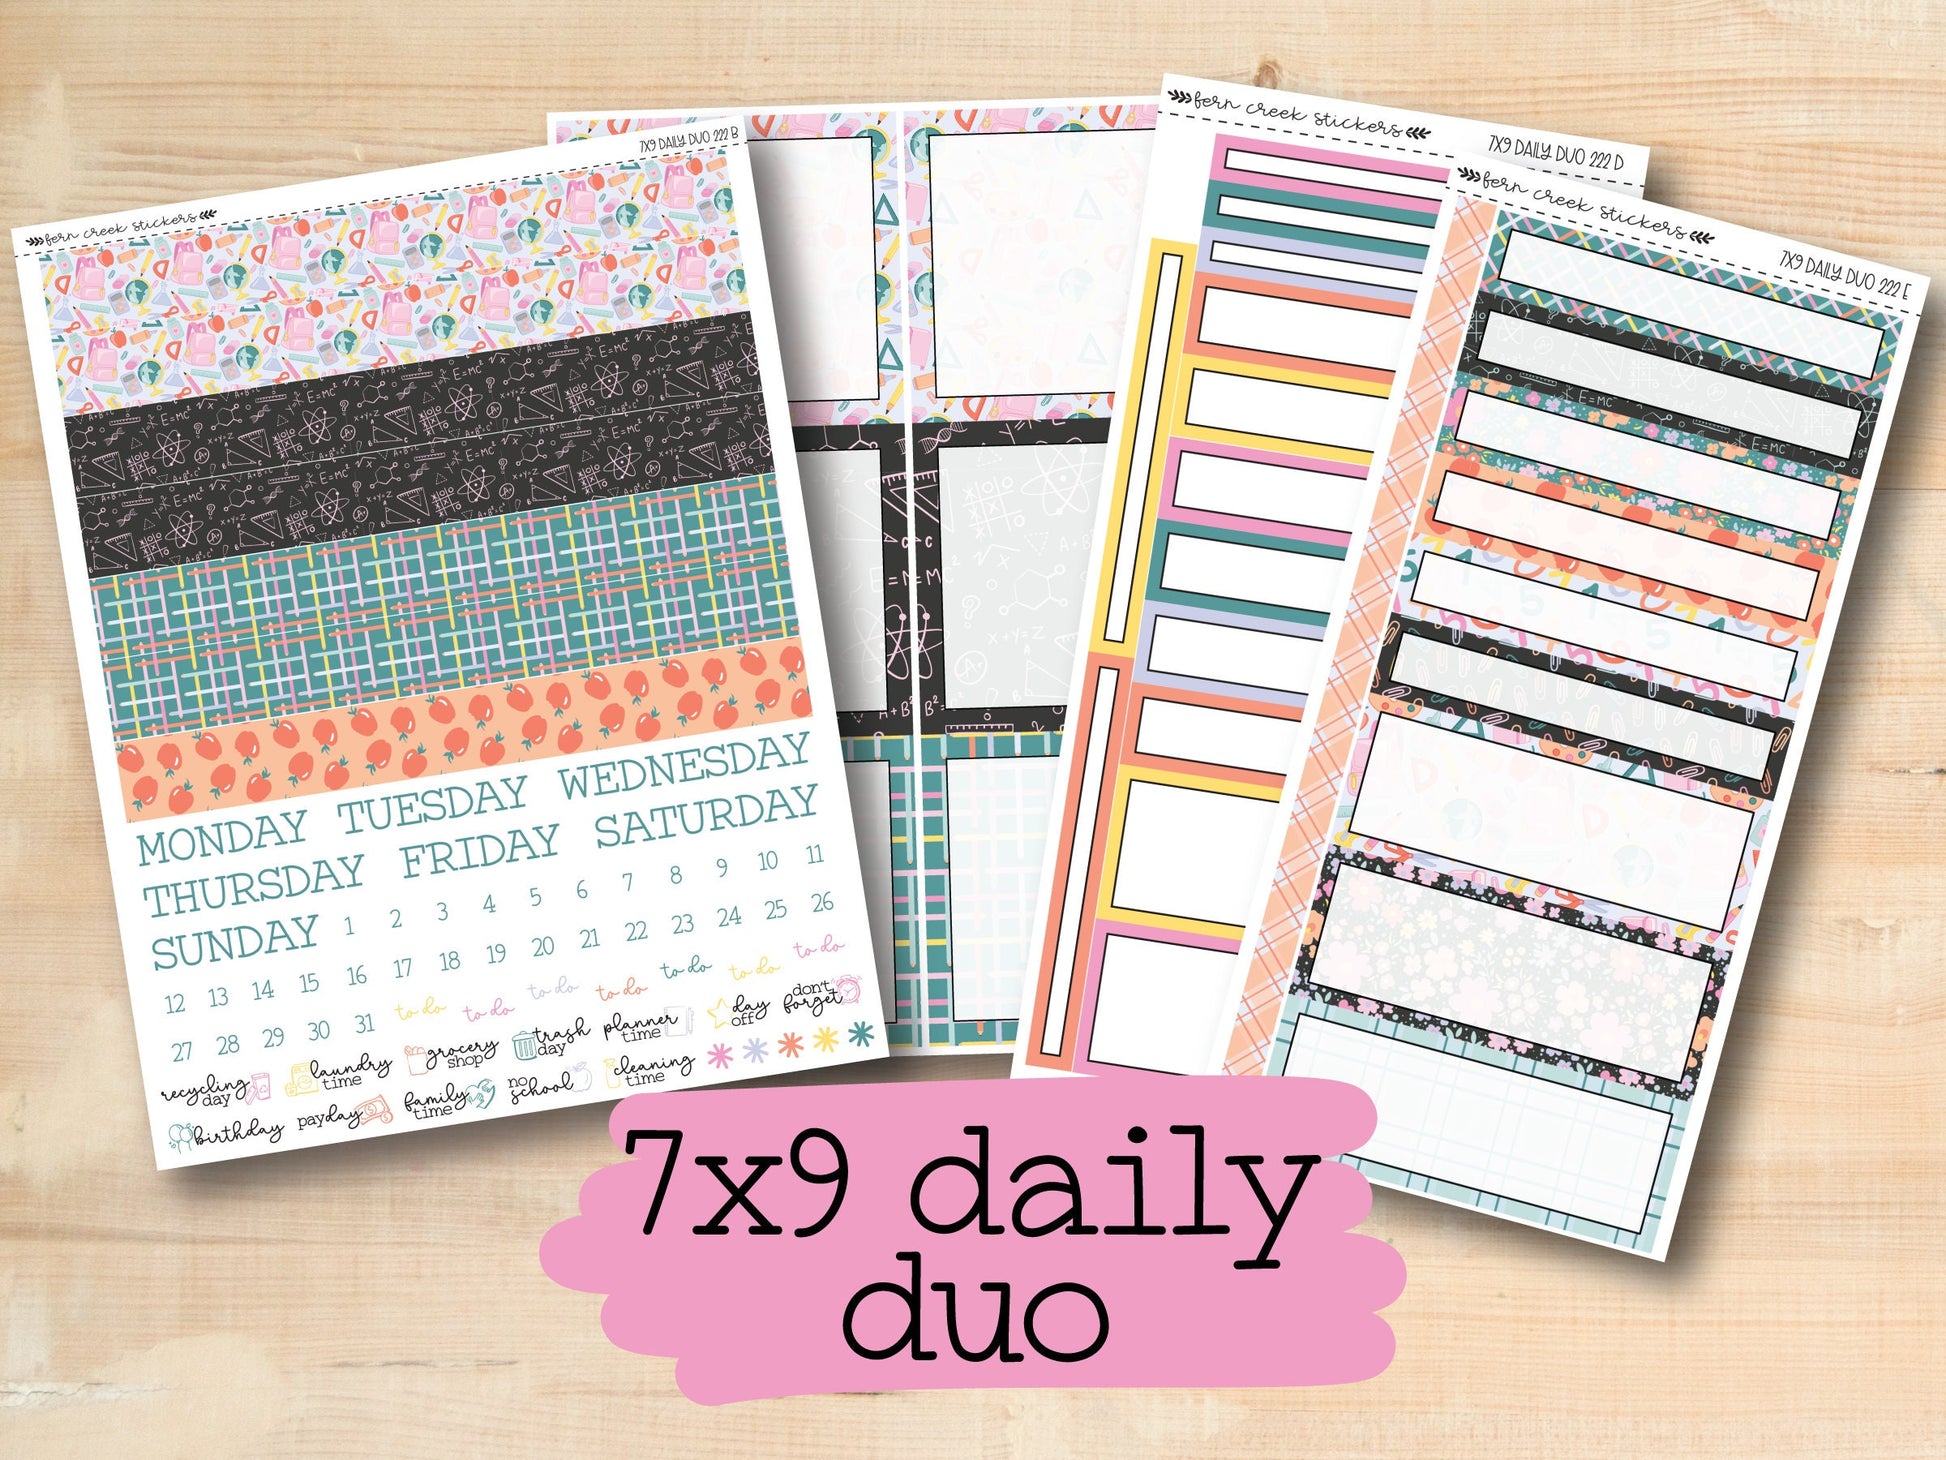 a variety of daily planner pages with the text 7x9 daily duo